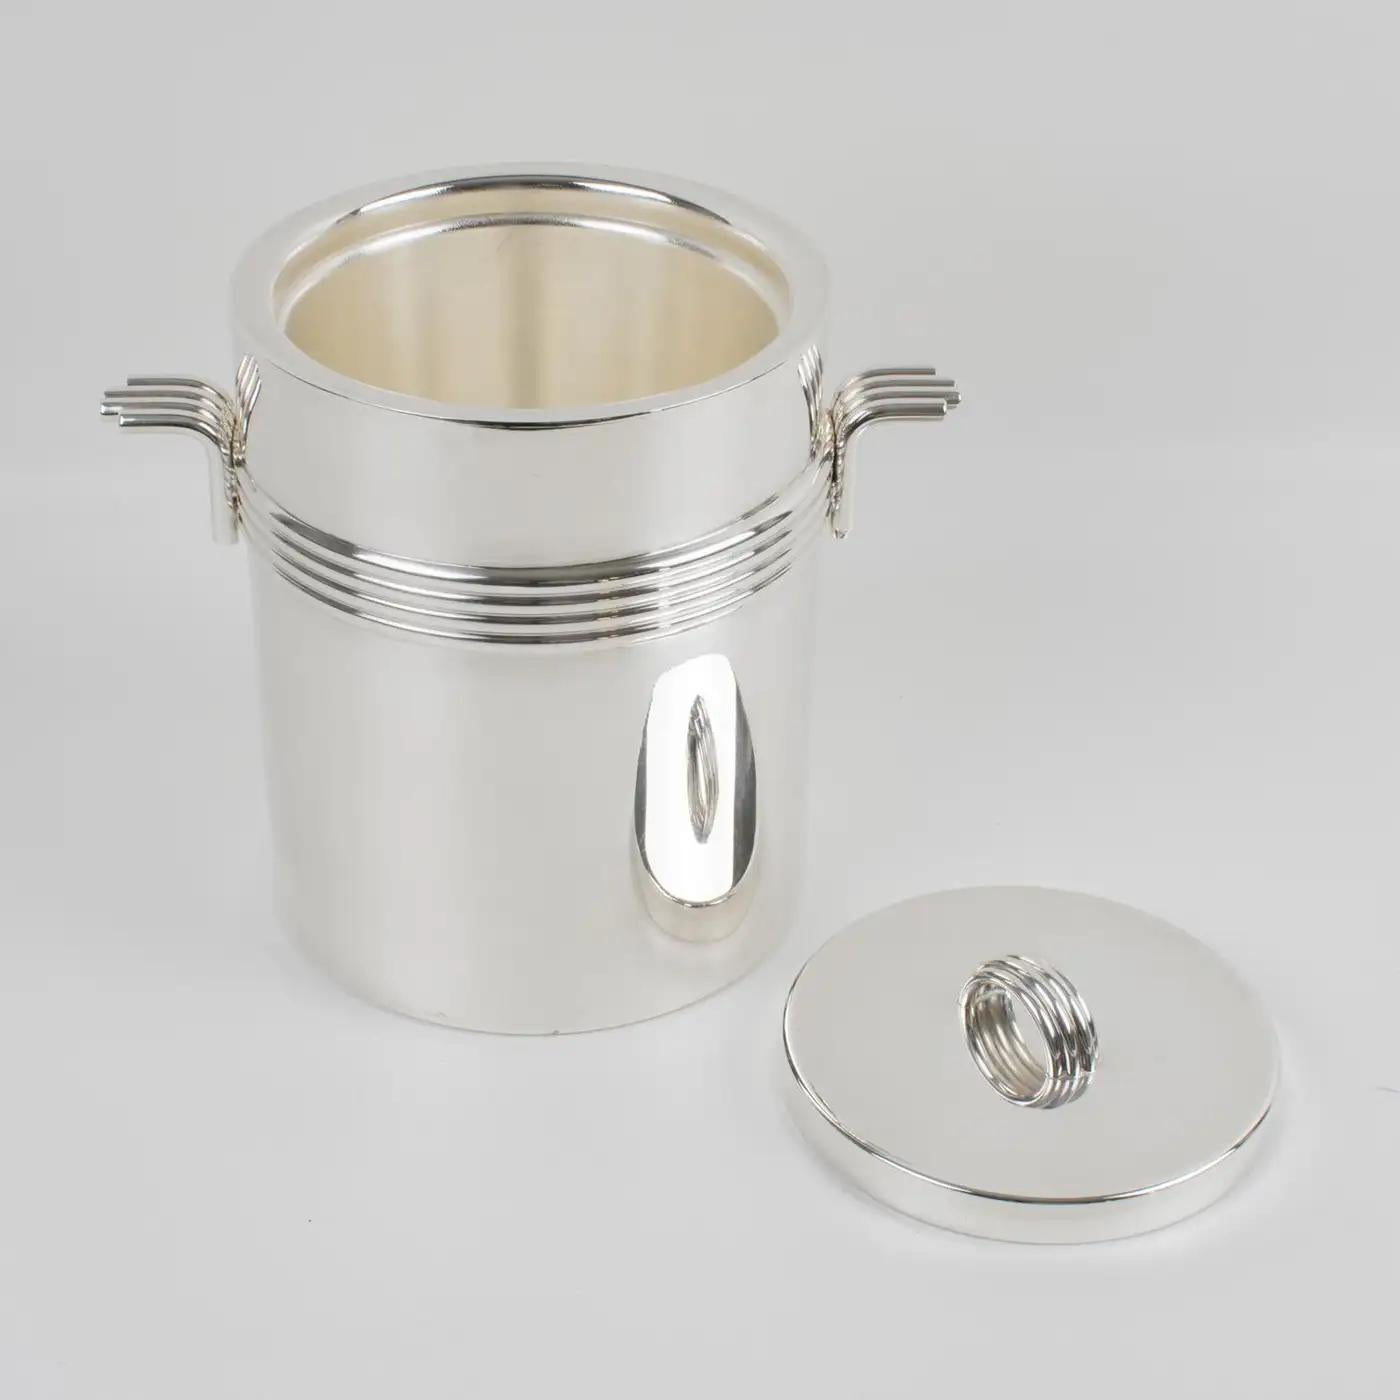 Christian Dior Home Silver Plate Ice Bucket or Cooler In Good Condition For Sale In Atlanta, GA